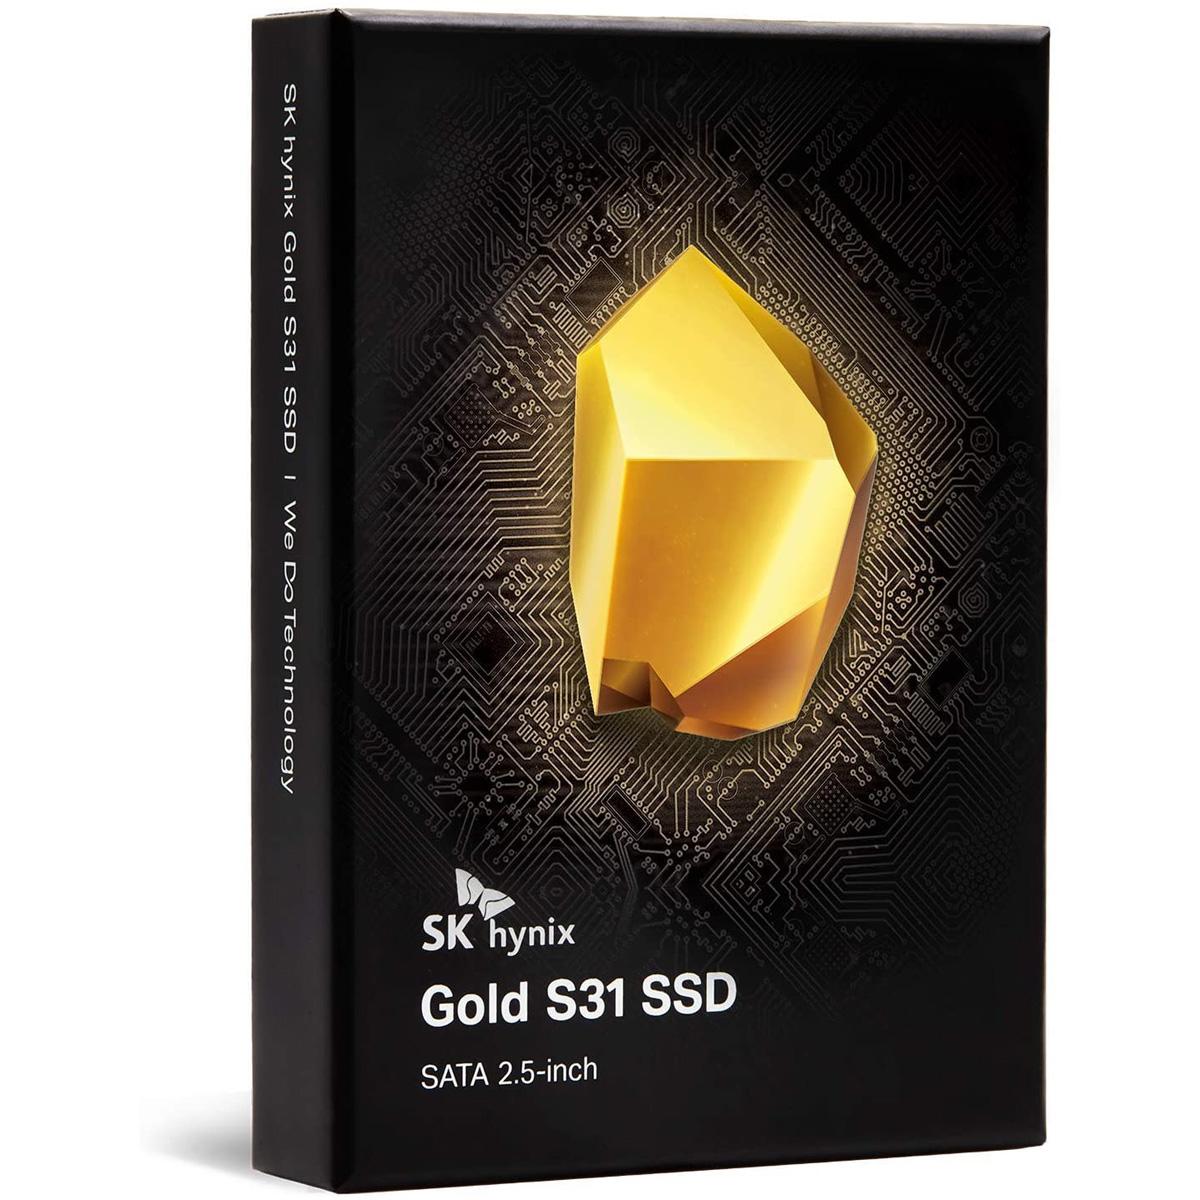 SK hynix Gold S31 1TB 3D NAND Sata III SSD for $83.19 Shipped